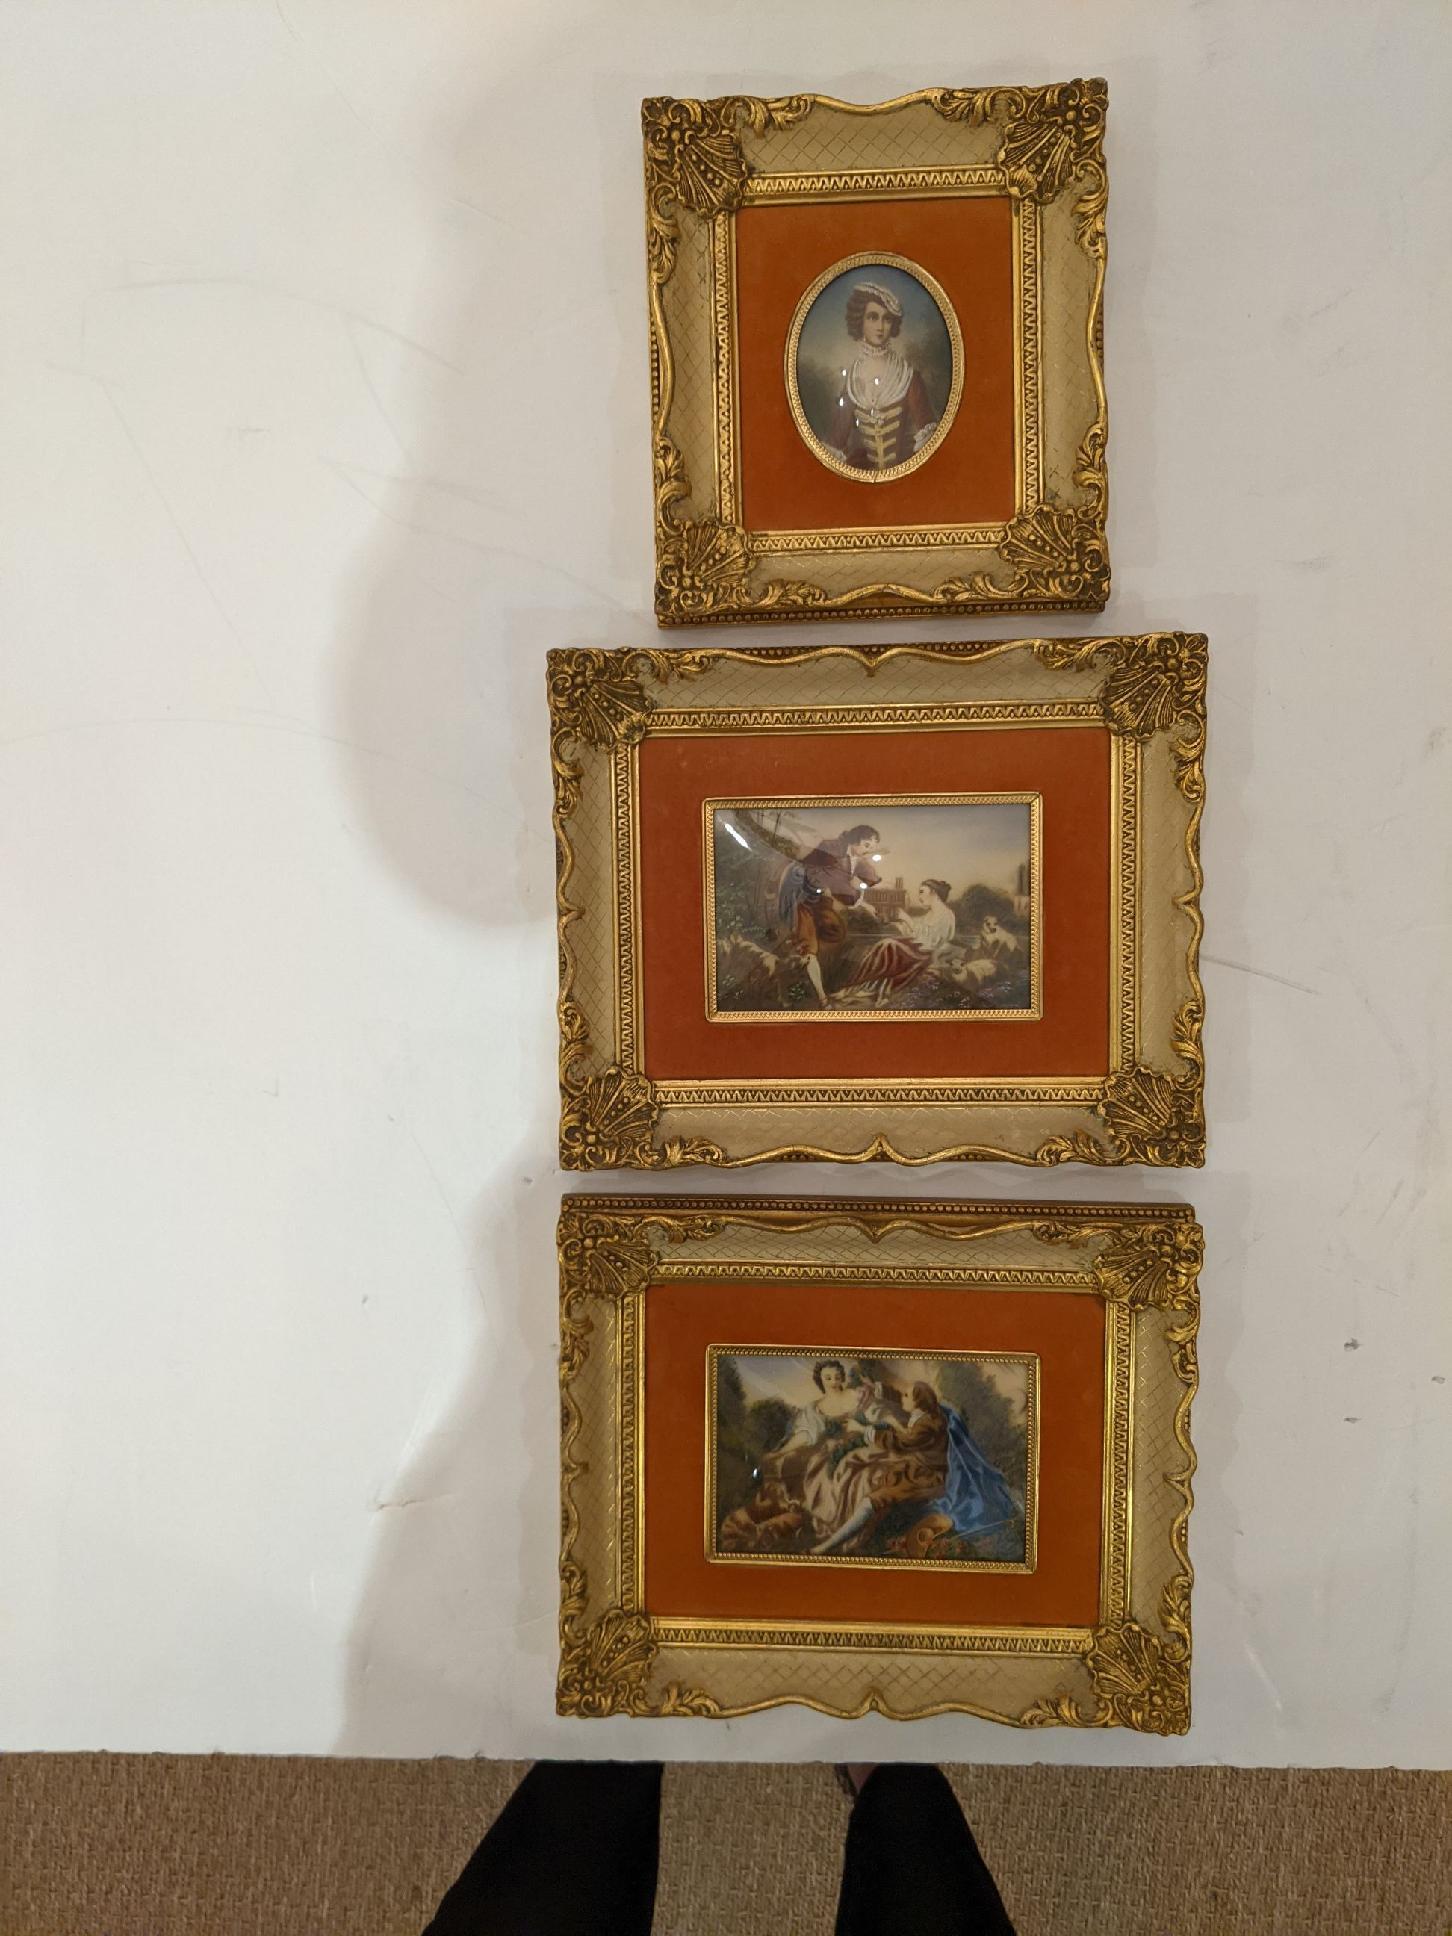 Lovely set of 3 French romantic antique paintings on polymer, matted in plush orange velvet and fancy giltwood frames. Subjects are 18th century romantic rendezvous including shepherd and shpherdesss signed Geffie; lady and Gentleman of the court